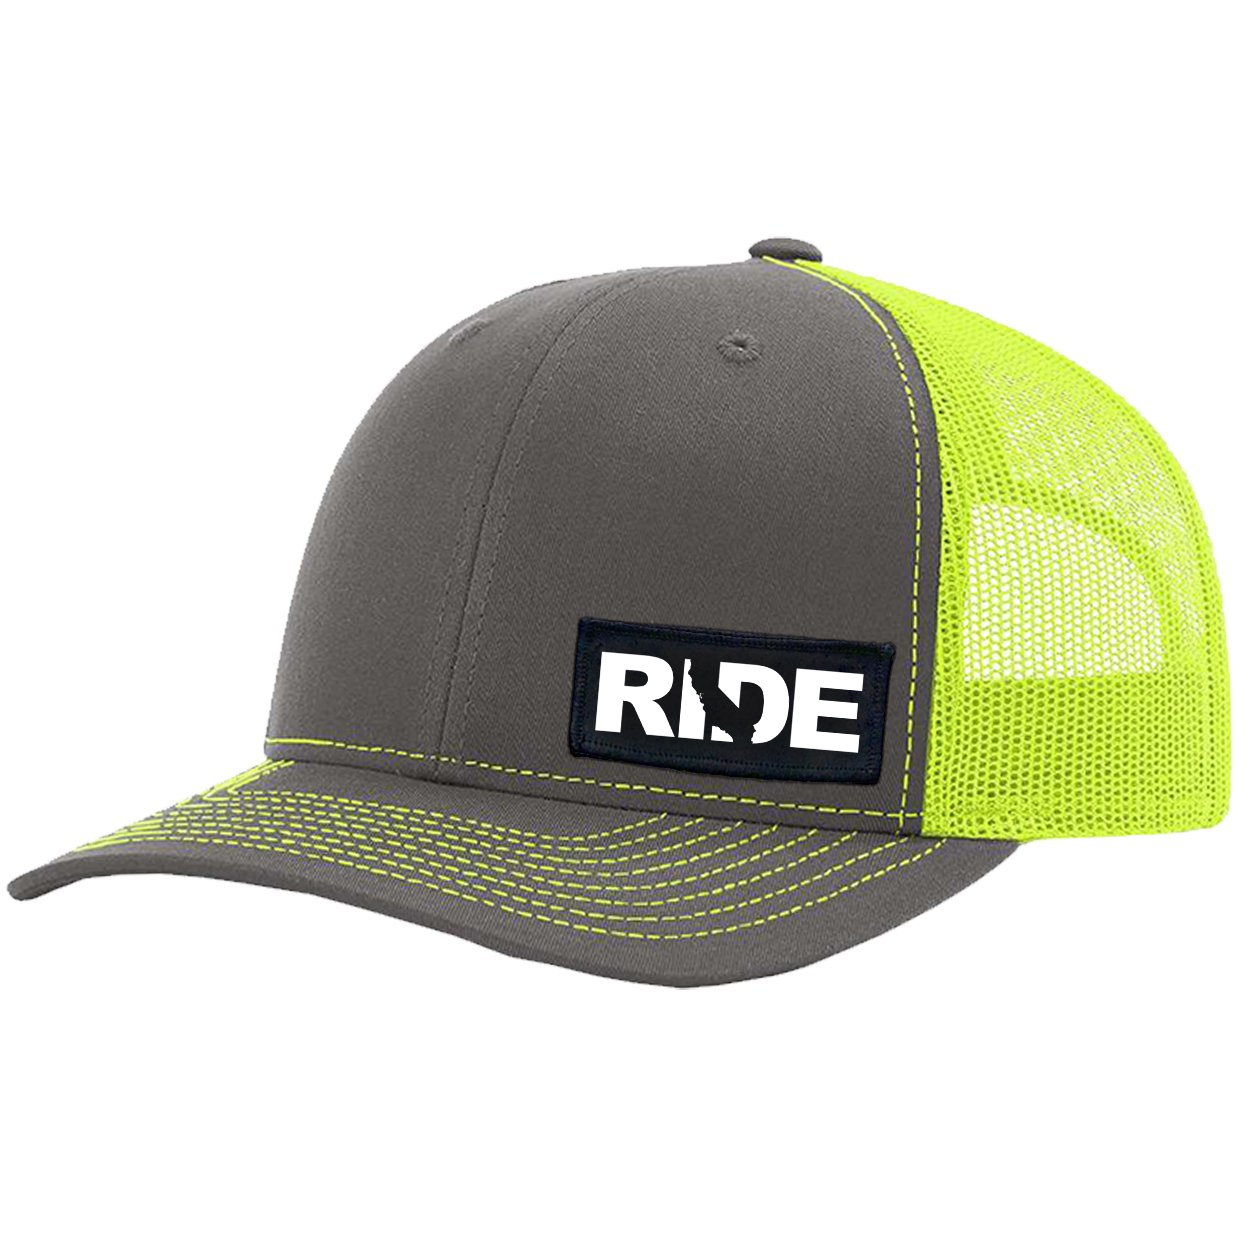 Ride California Night Out Woven Patch Snapback Trucker Hat Charcoal/Neon Yellow (White Logo)